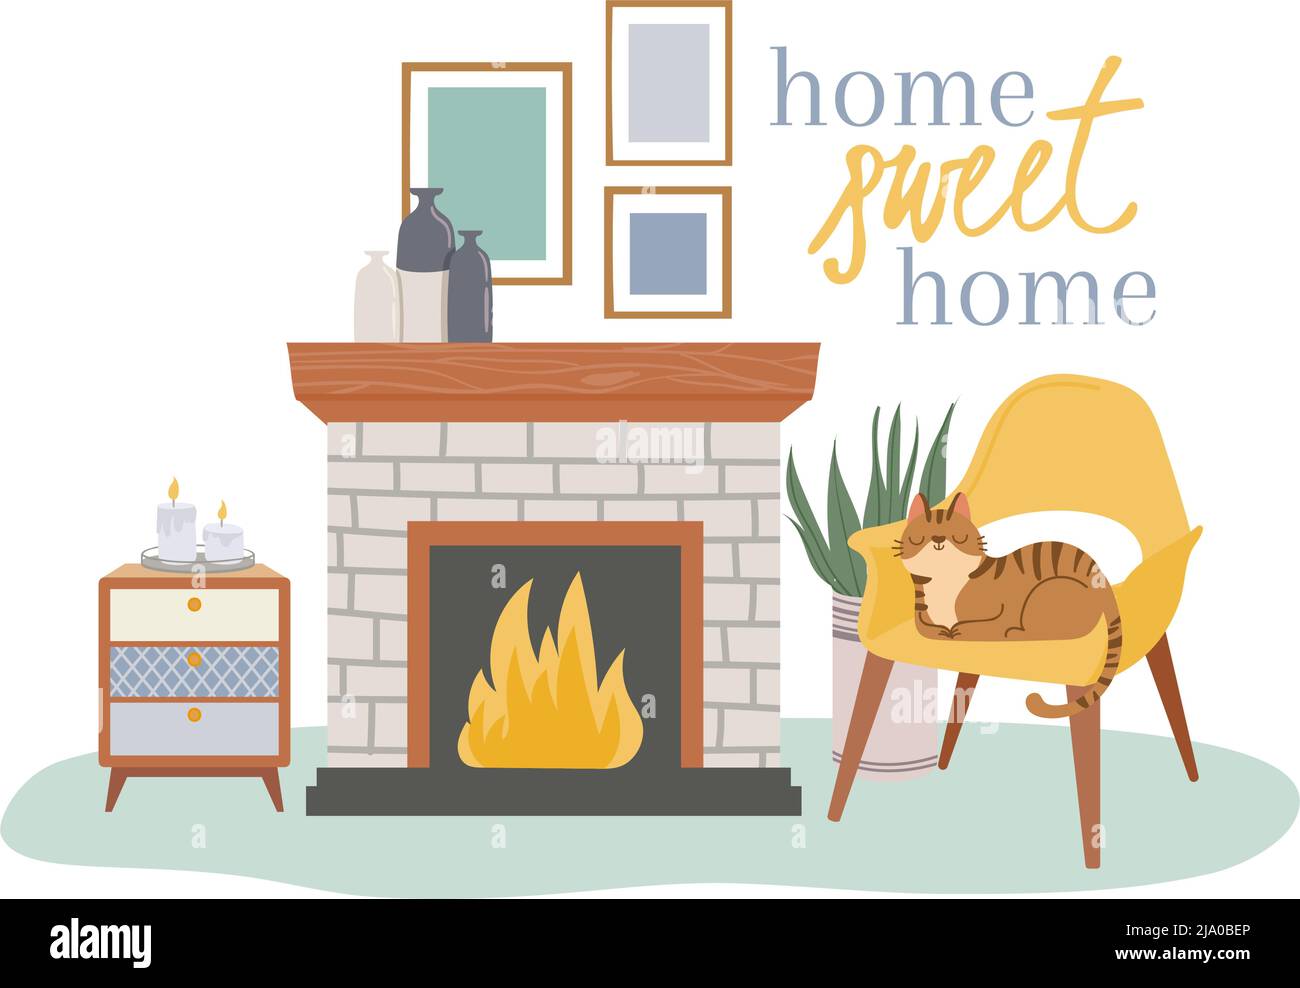 Scandic cozy interior, fireplace and cozy chair Stock Vector